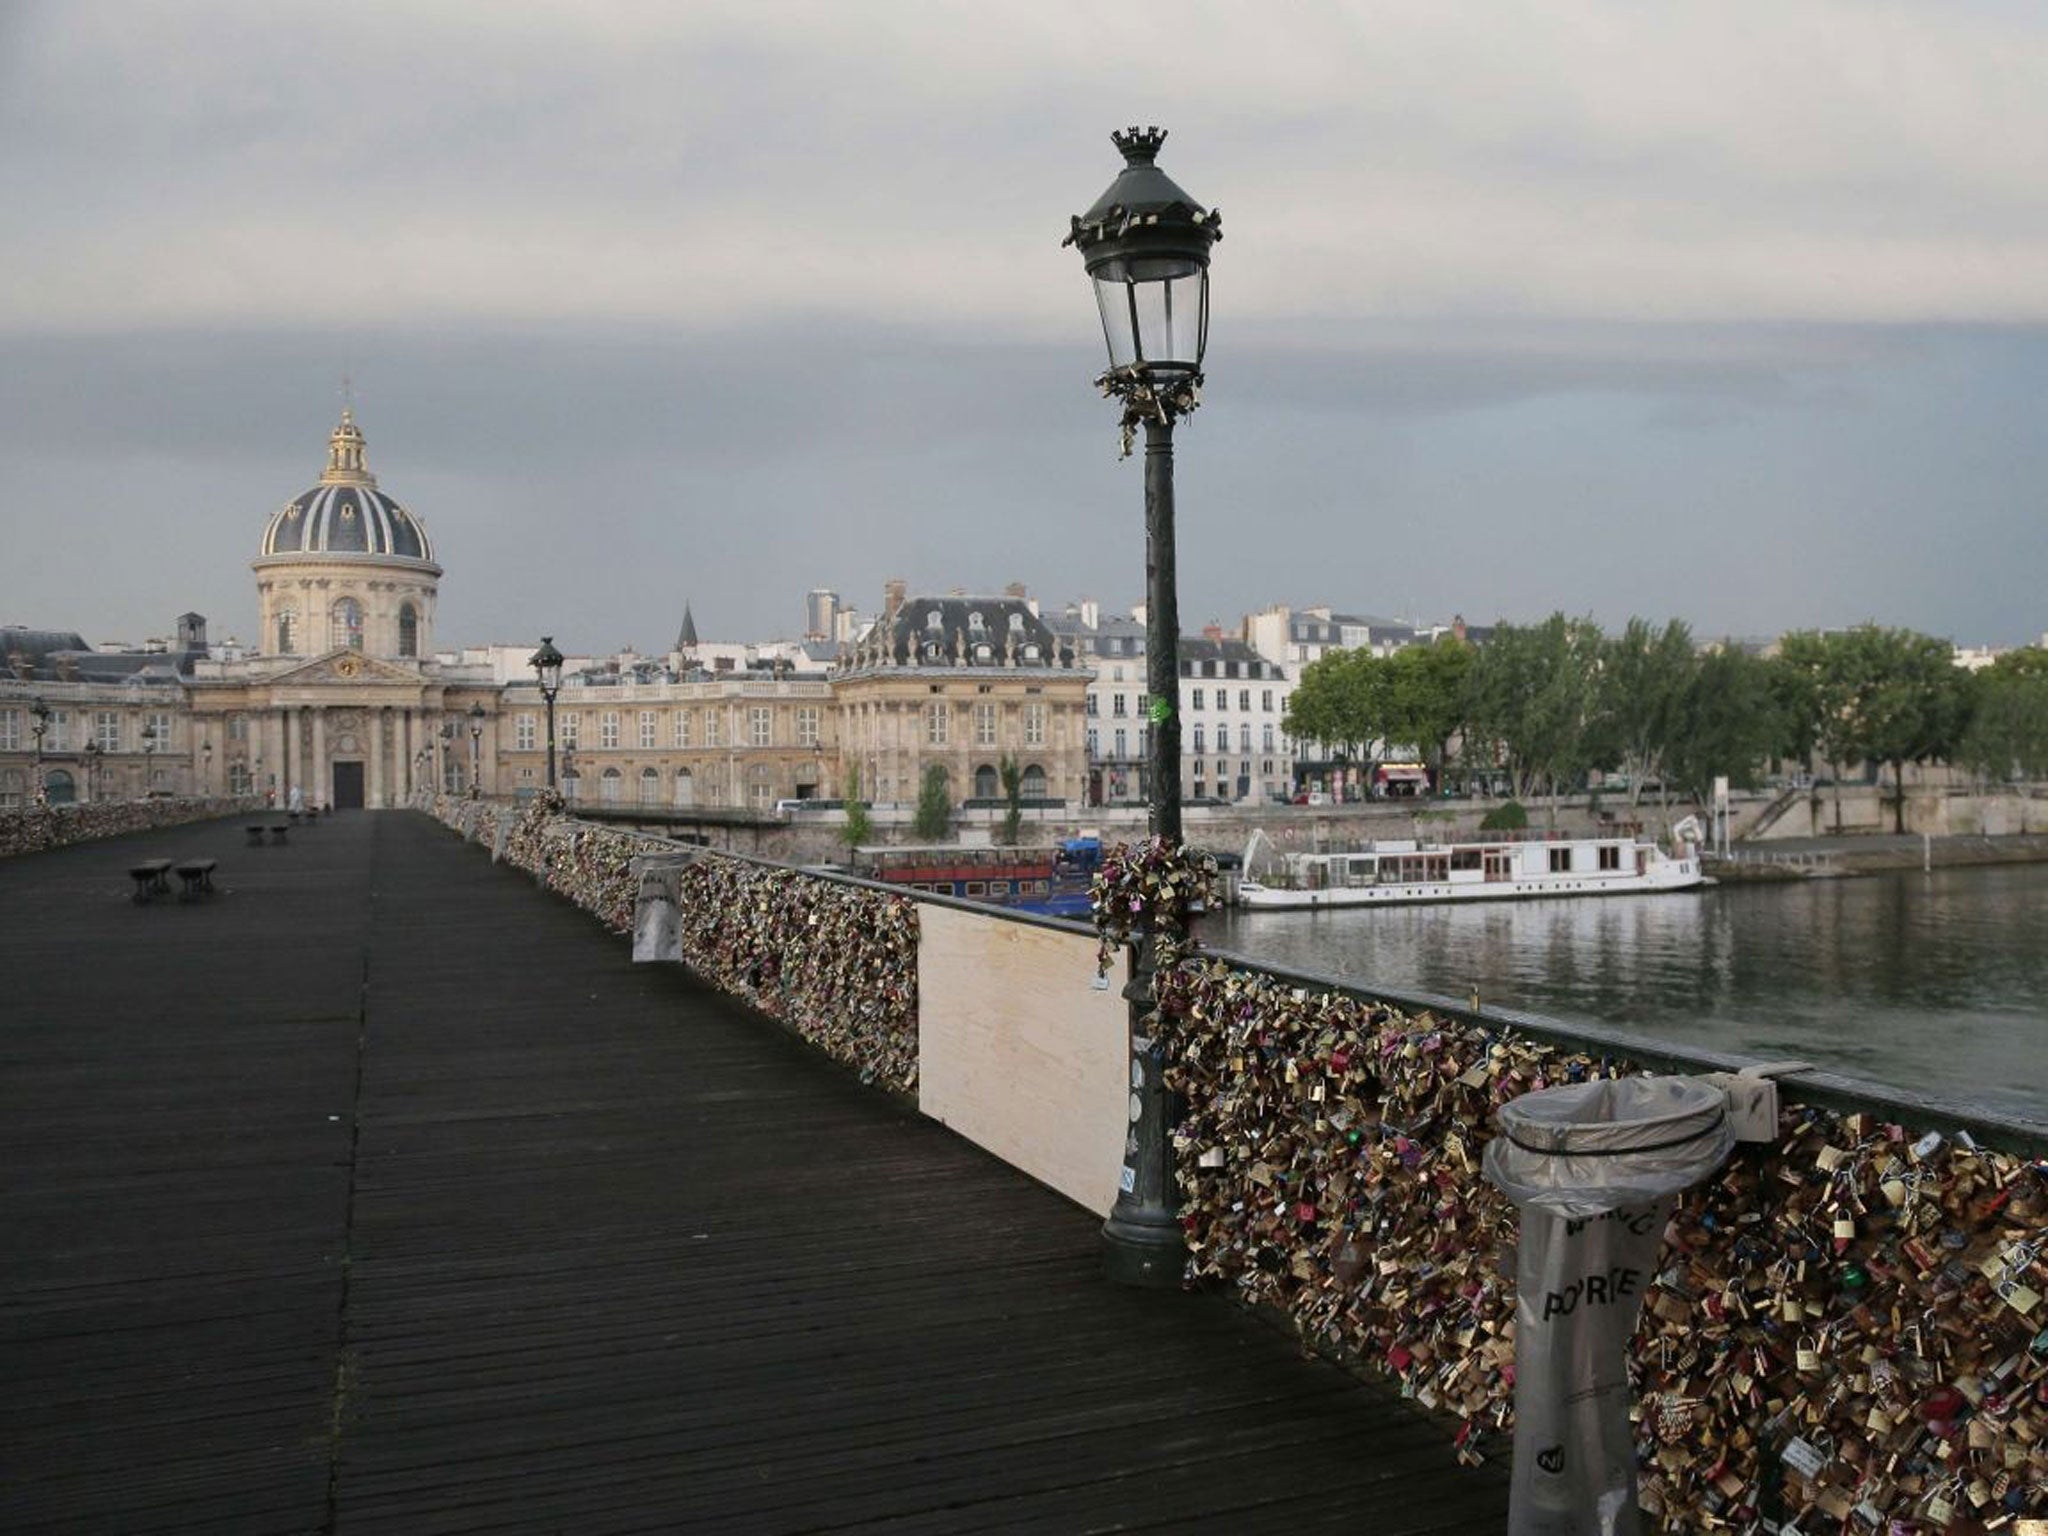 A photo taken on June 9, 2014 shows 'love padlocks' attached to a fence of the Pont des Arts bridge over the Seine river in Paris